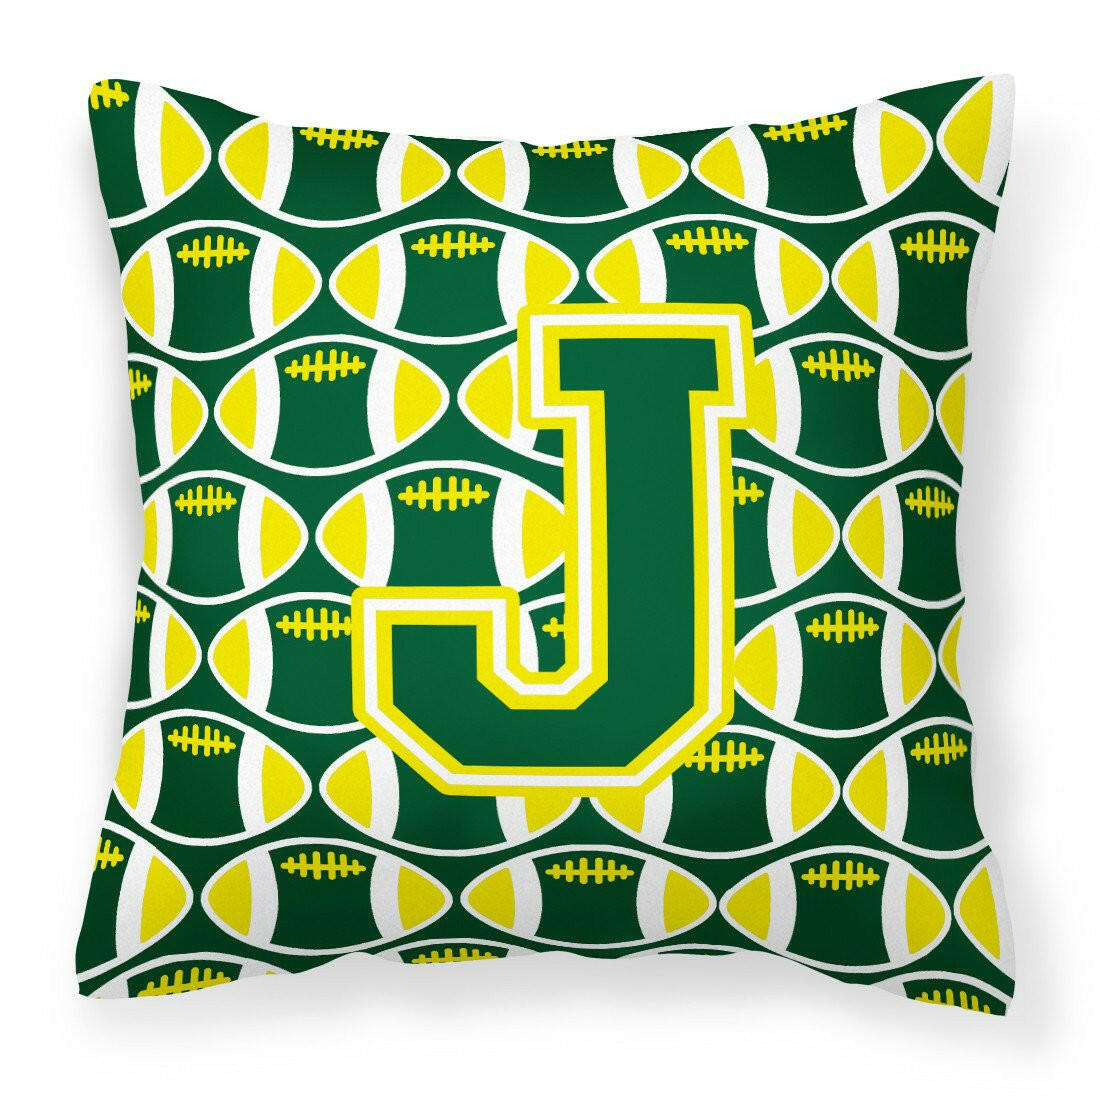 Letter J Football Green and Yellow Fabric Decorative Pillow CJ1075-JPW1414 by Caroline's Treasures